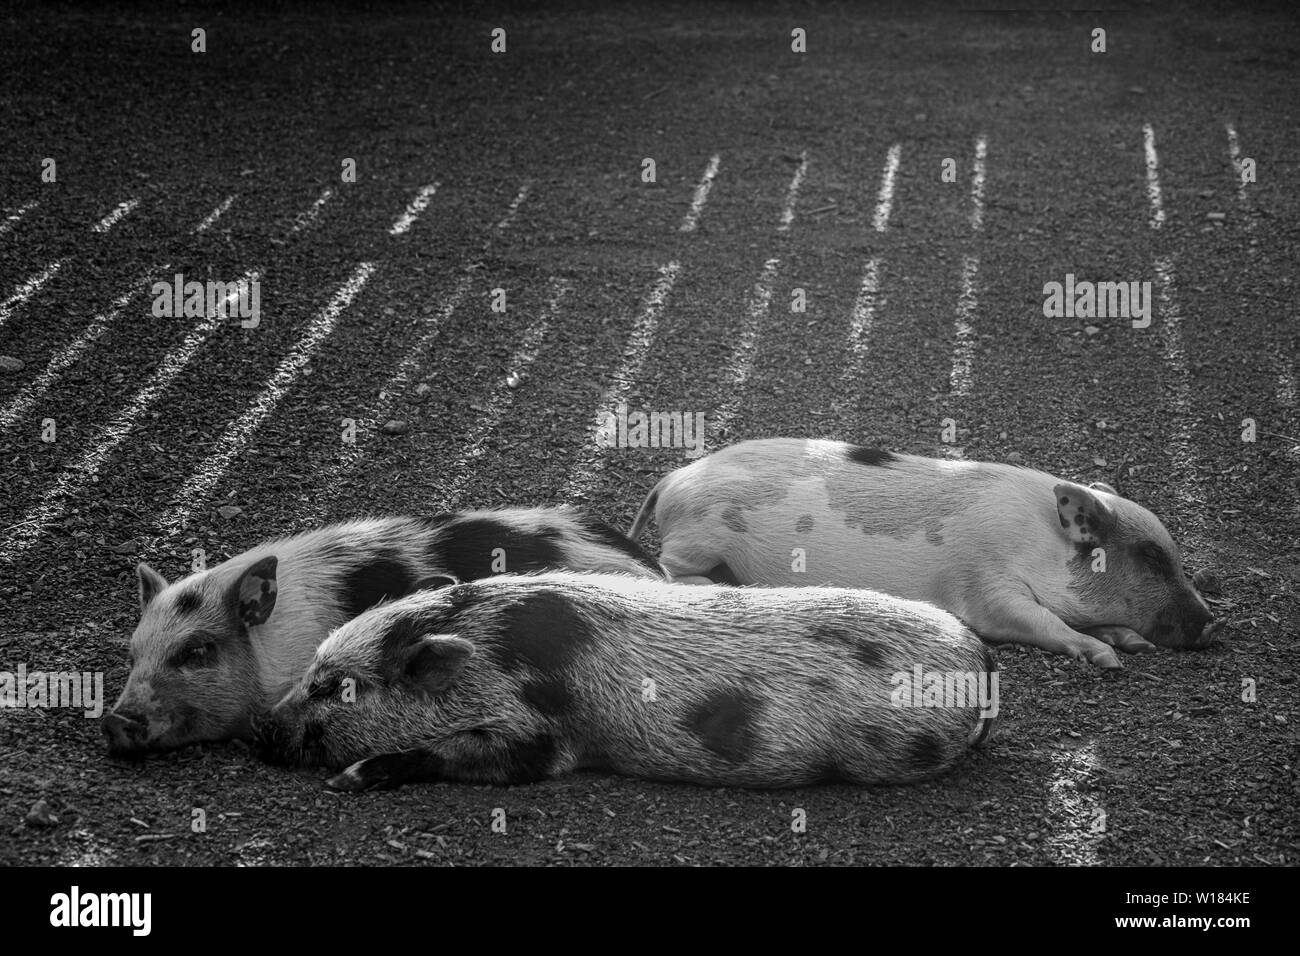 Three small pigs sleeping with diagonal shafts of sunlight in the background. Stock Photo